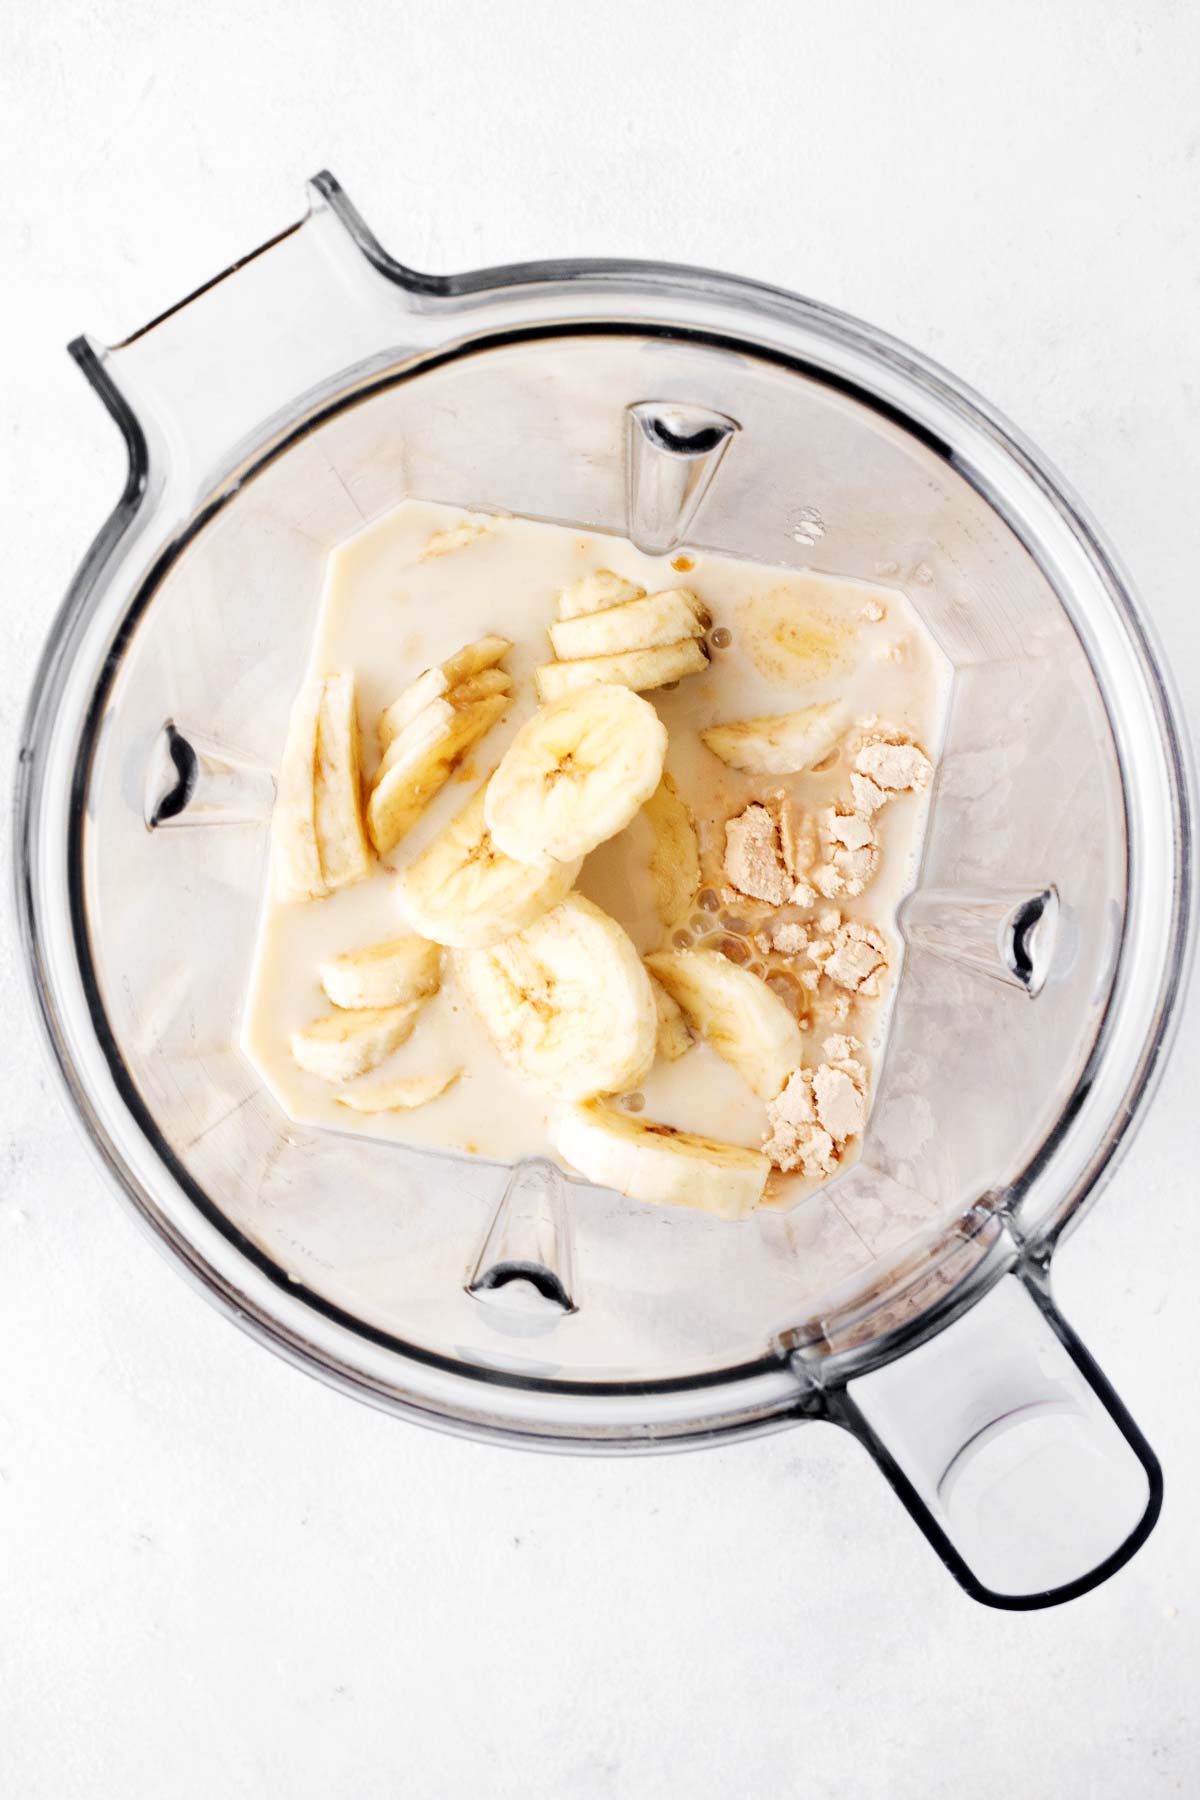 Peanut butter banana protein shake ingredients in a blender.